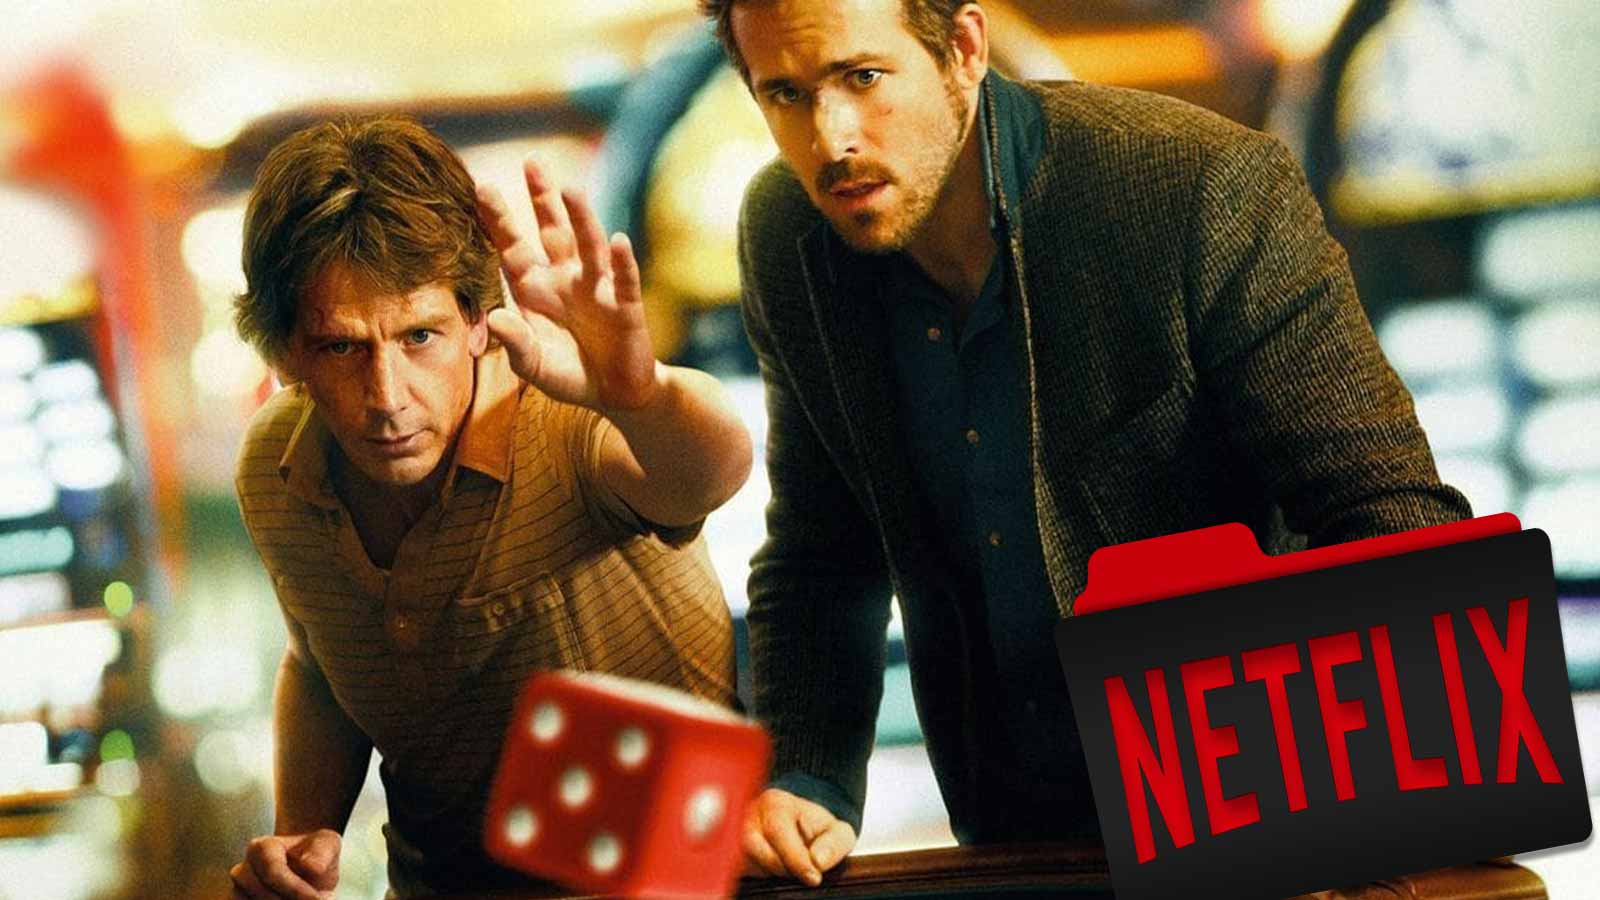 The Best Gambling Movies on Netflix